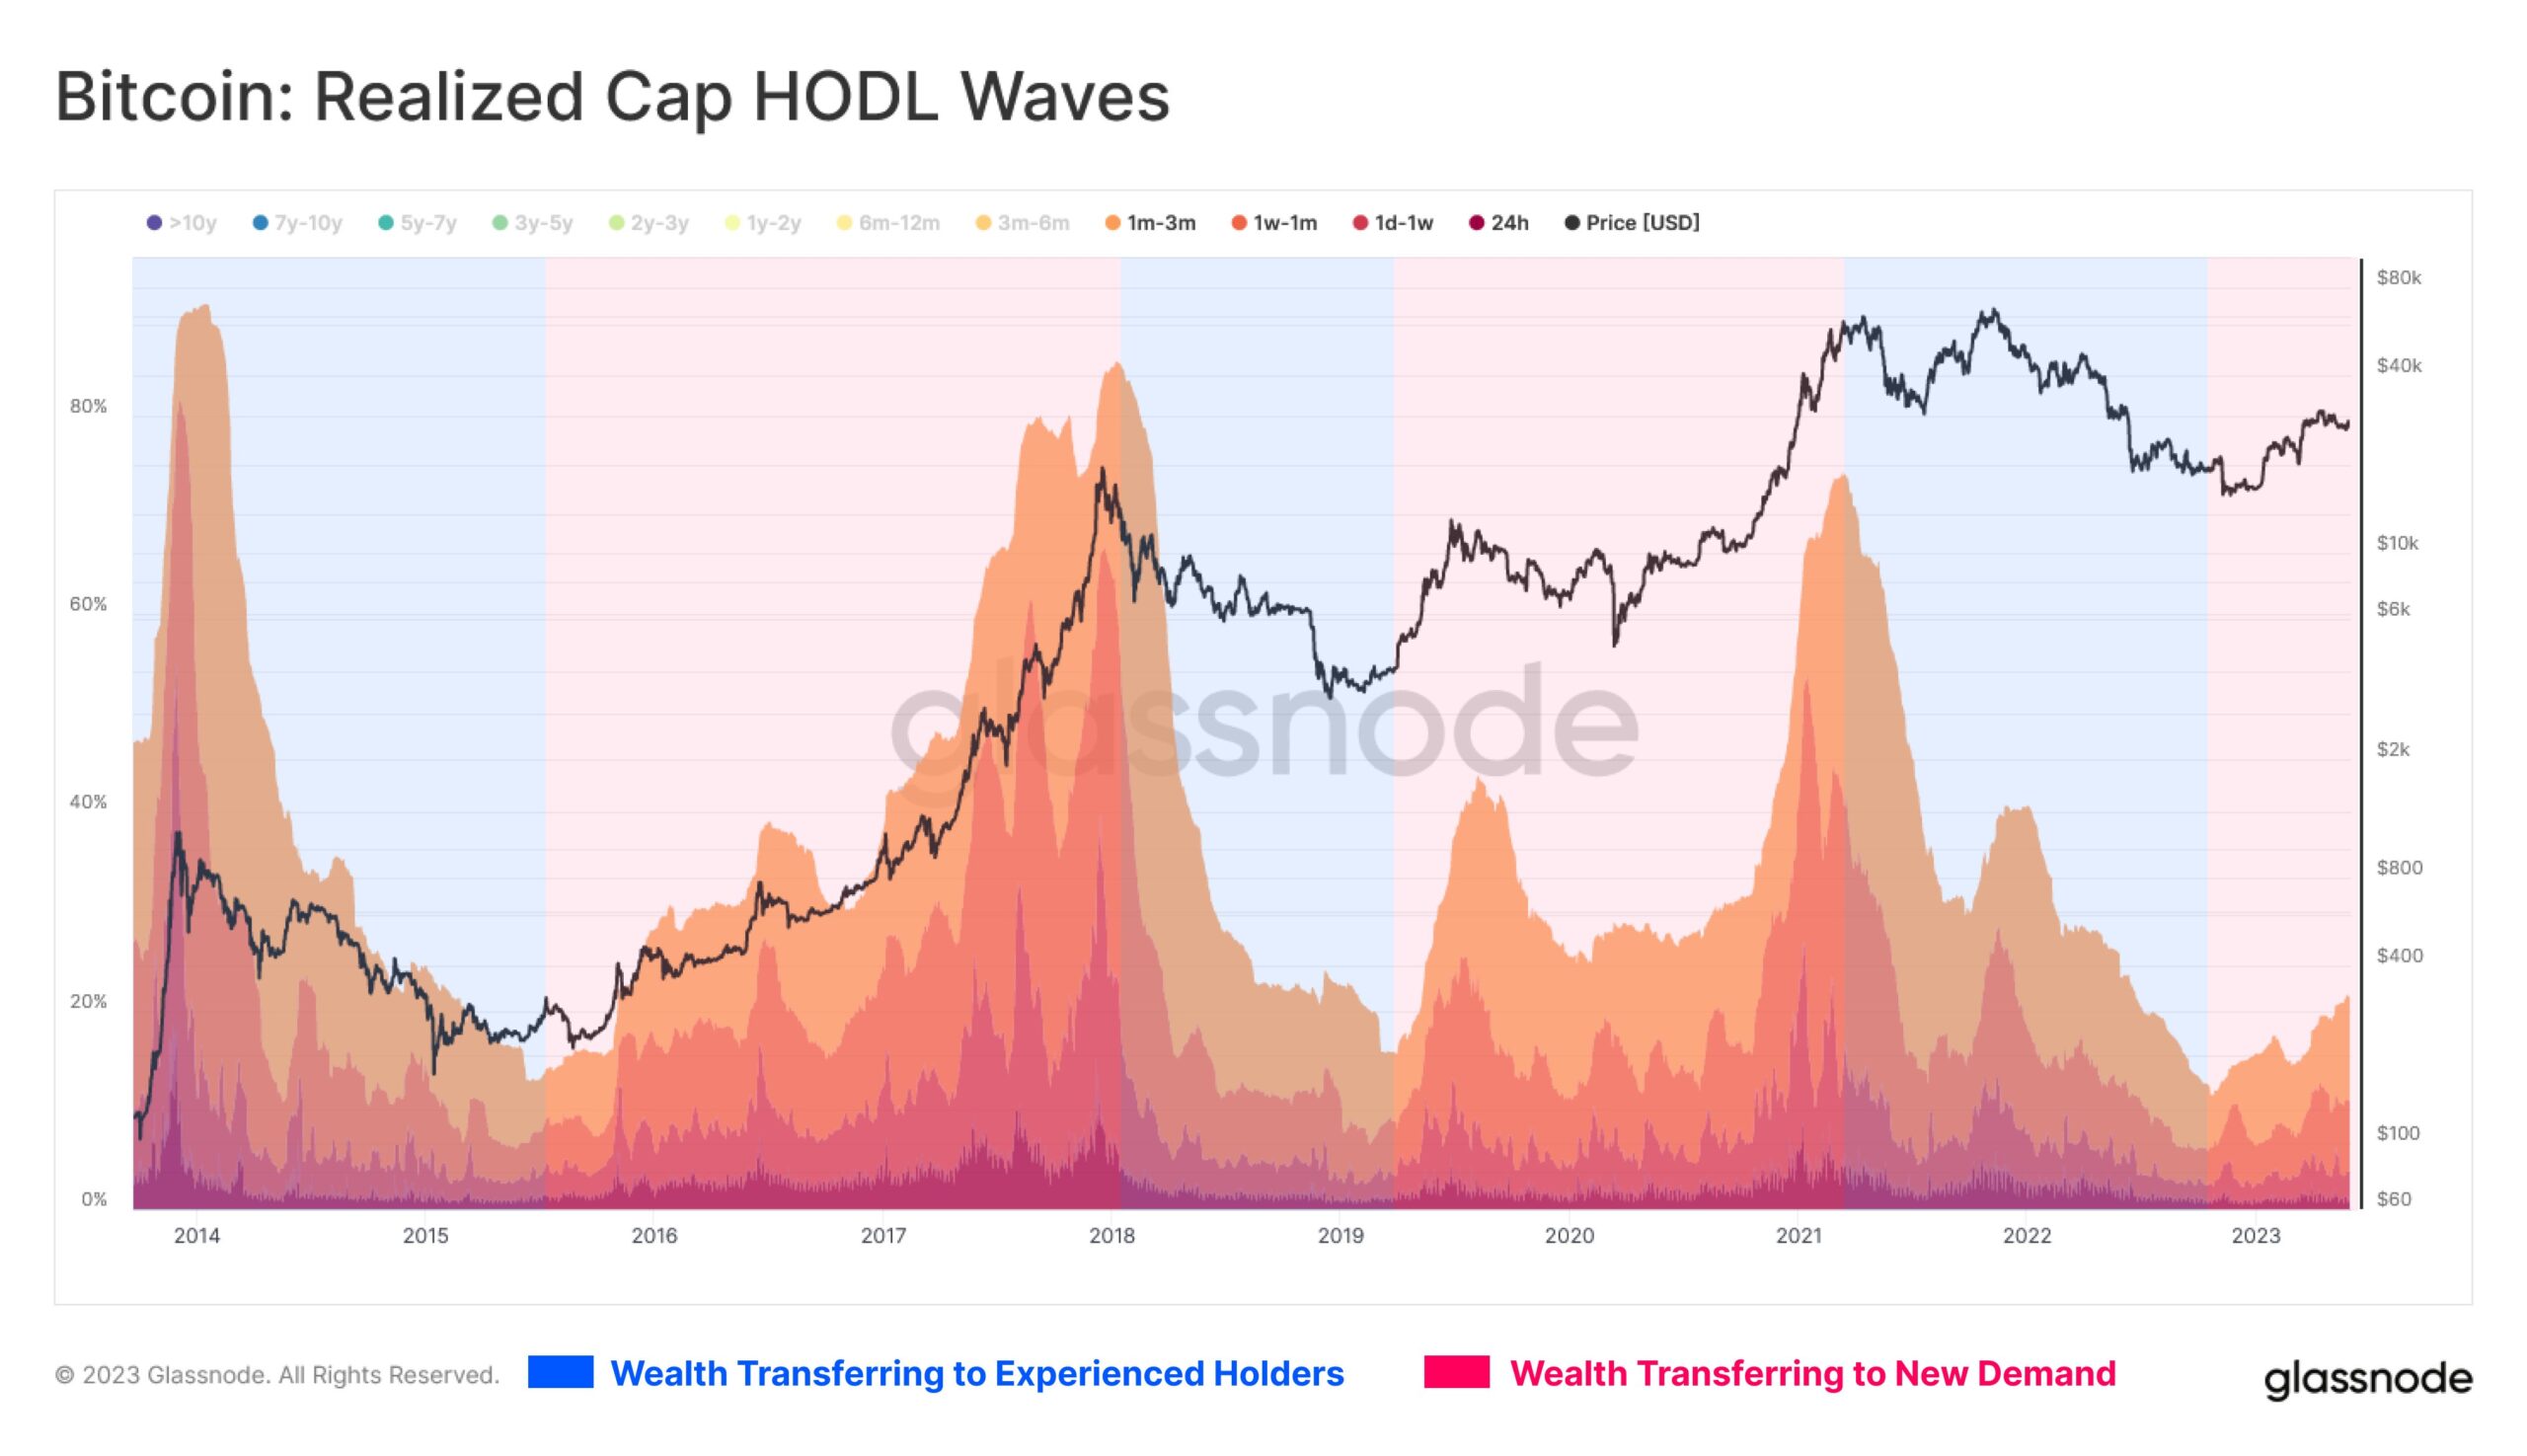 Bitcoin Wealth Transfer Suggests Market Cycle Inflection Point